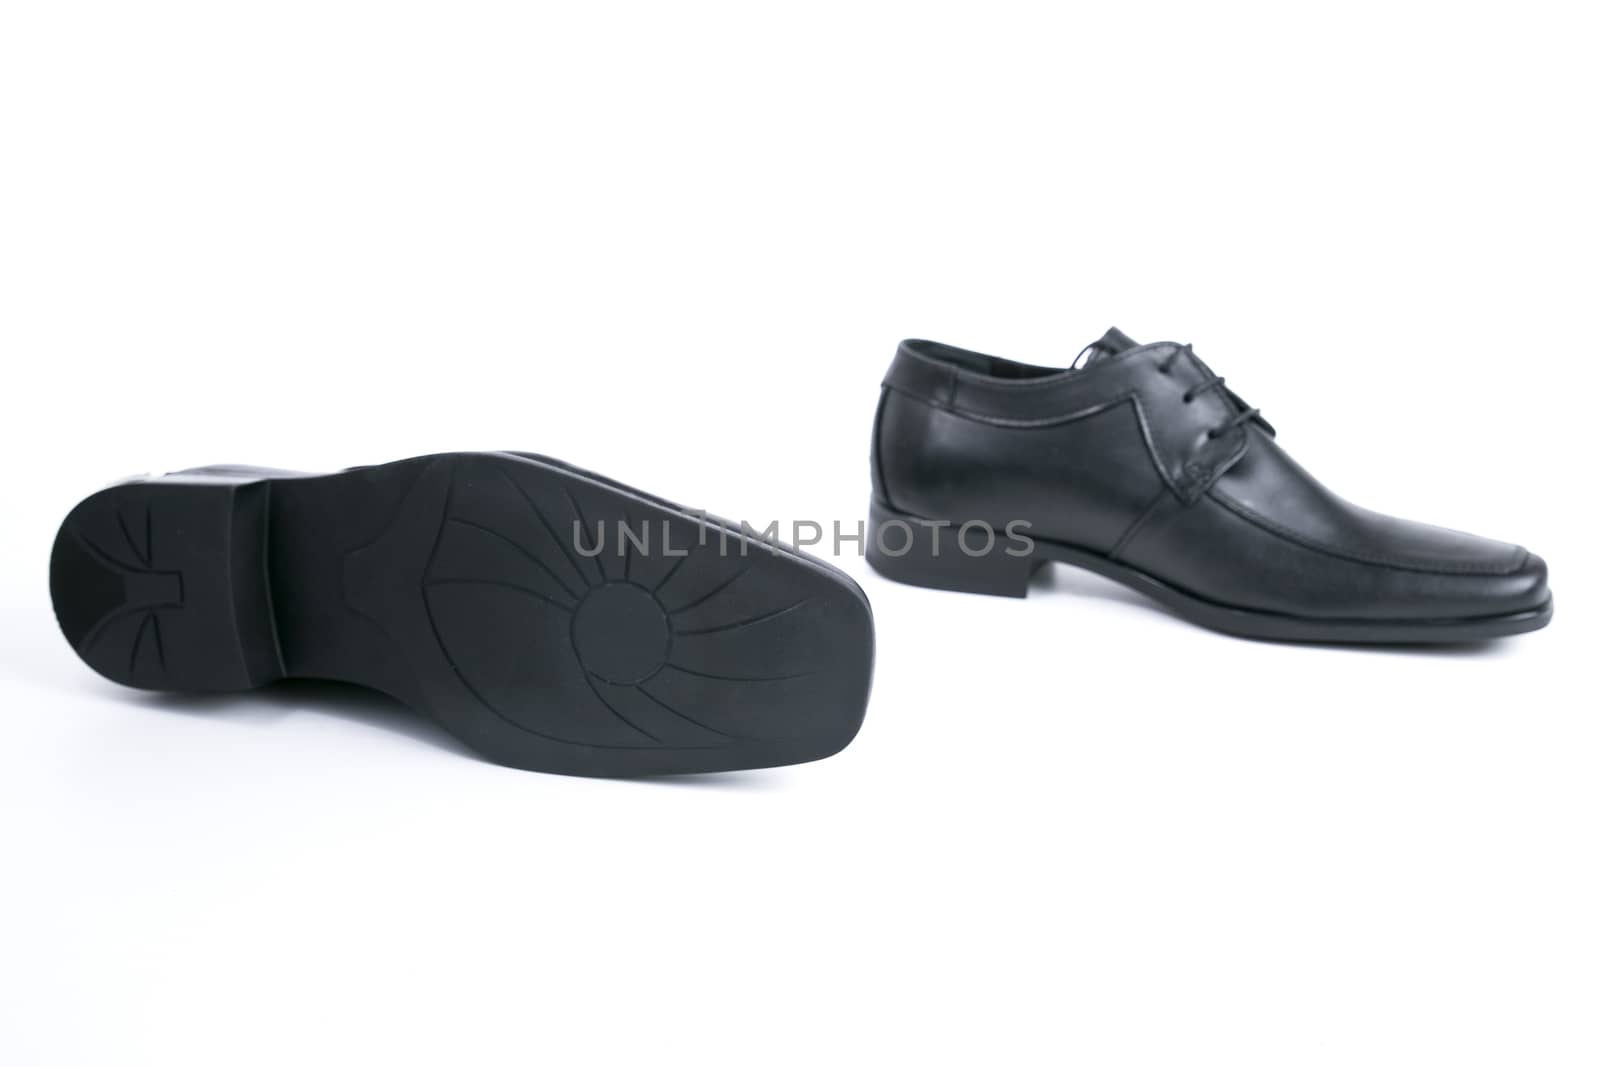 Pair of shoes on white background, top view.